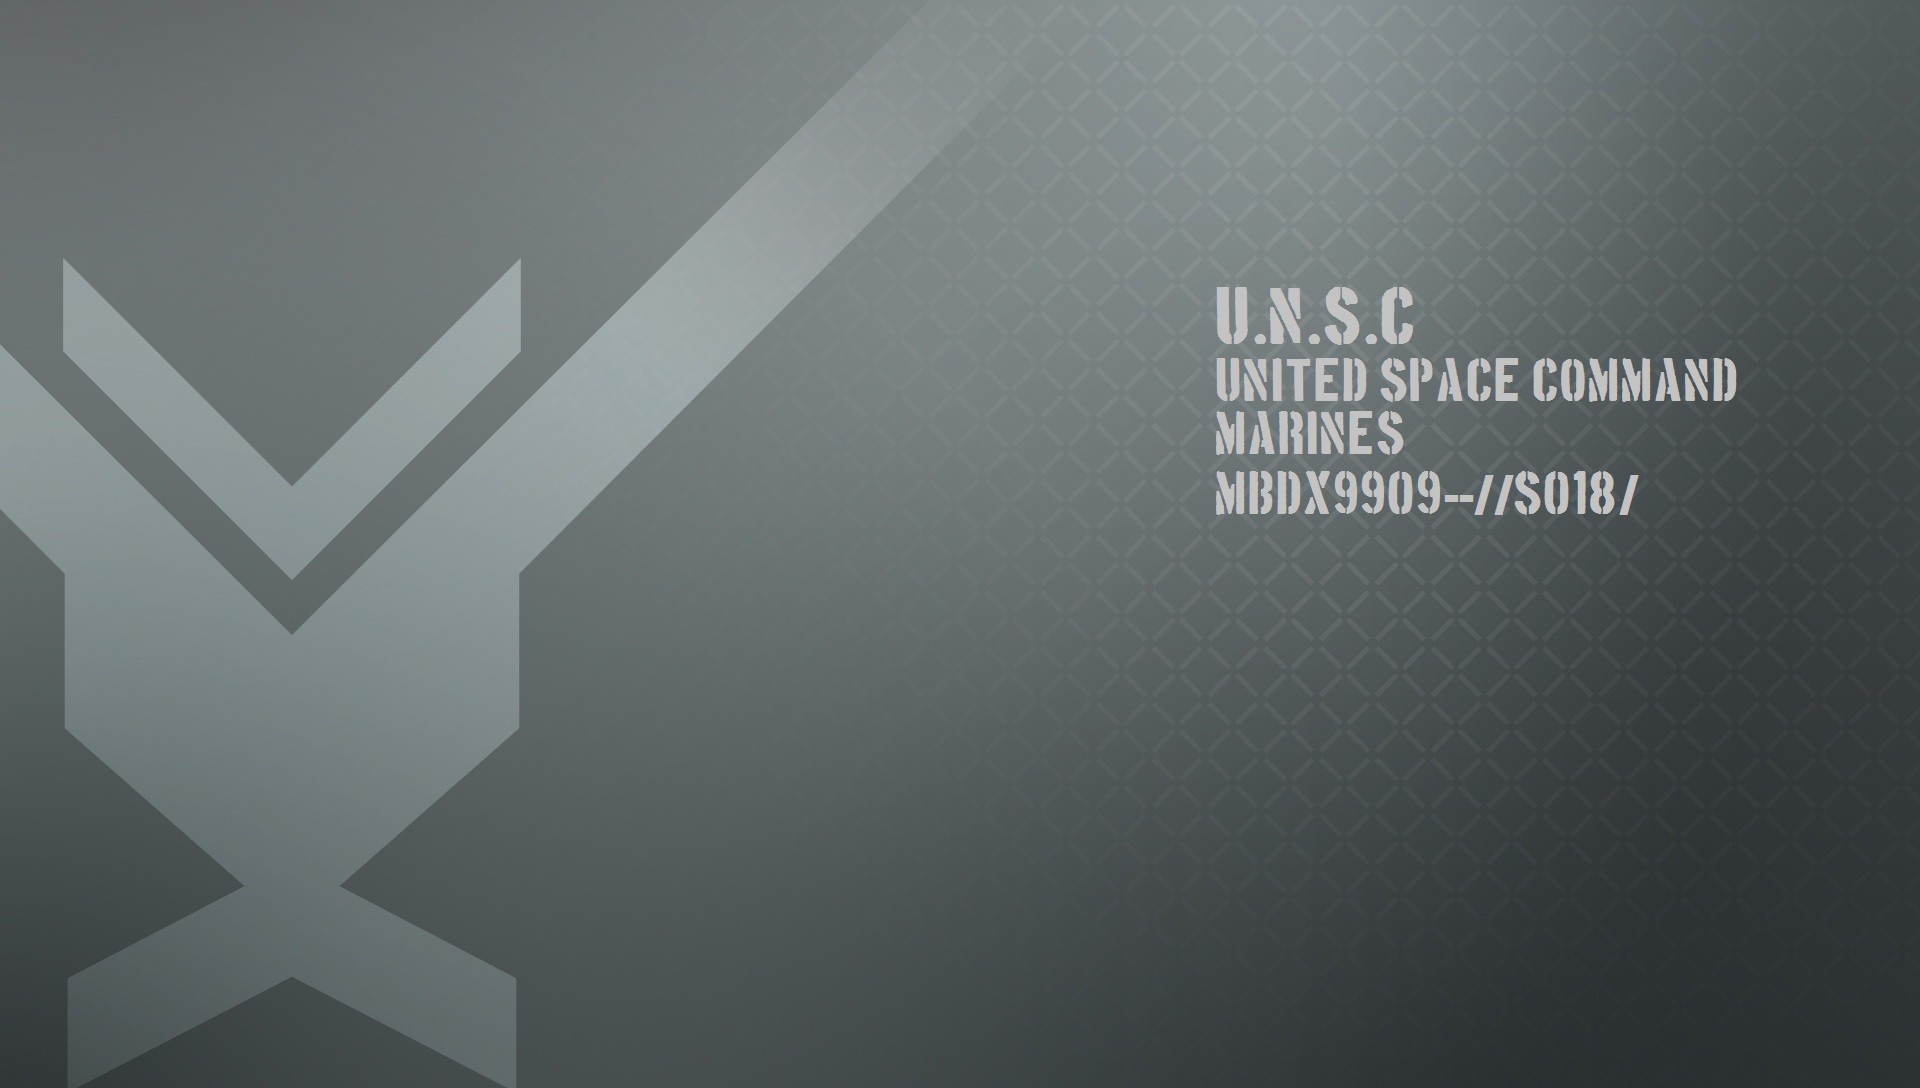 1920x1088 Unsc Logo Wallpaper Download For Free This Widescreen Pictures to pin .